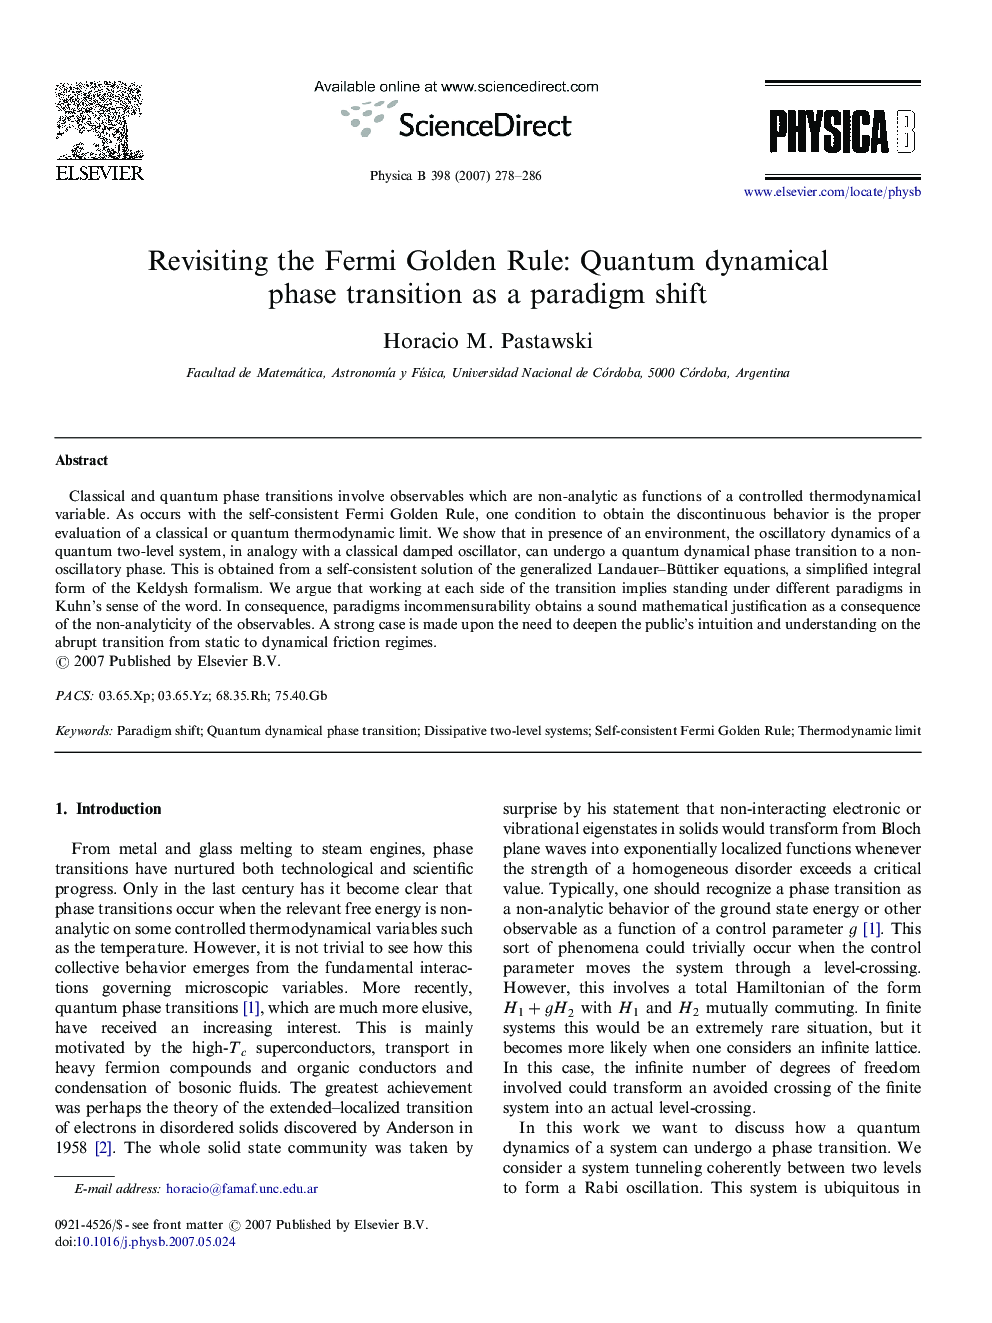 Revisiting the Fermi Golden Rule: Quantum dynamical phase transition as a paradigm shift